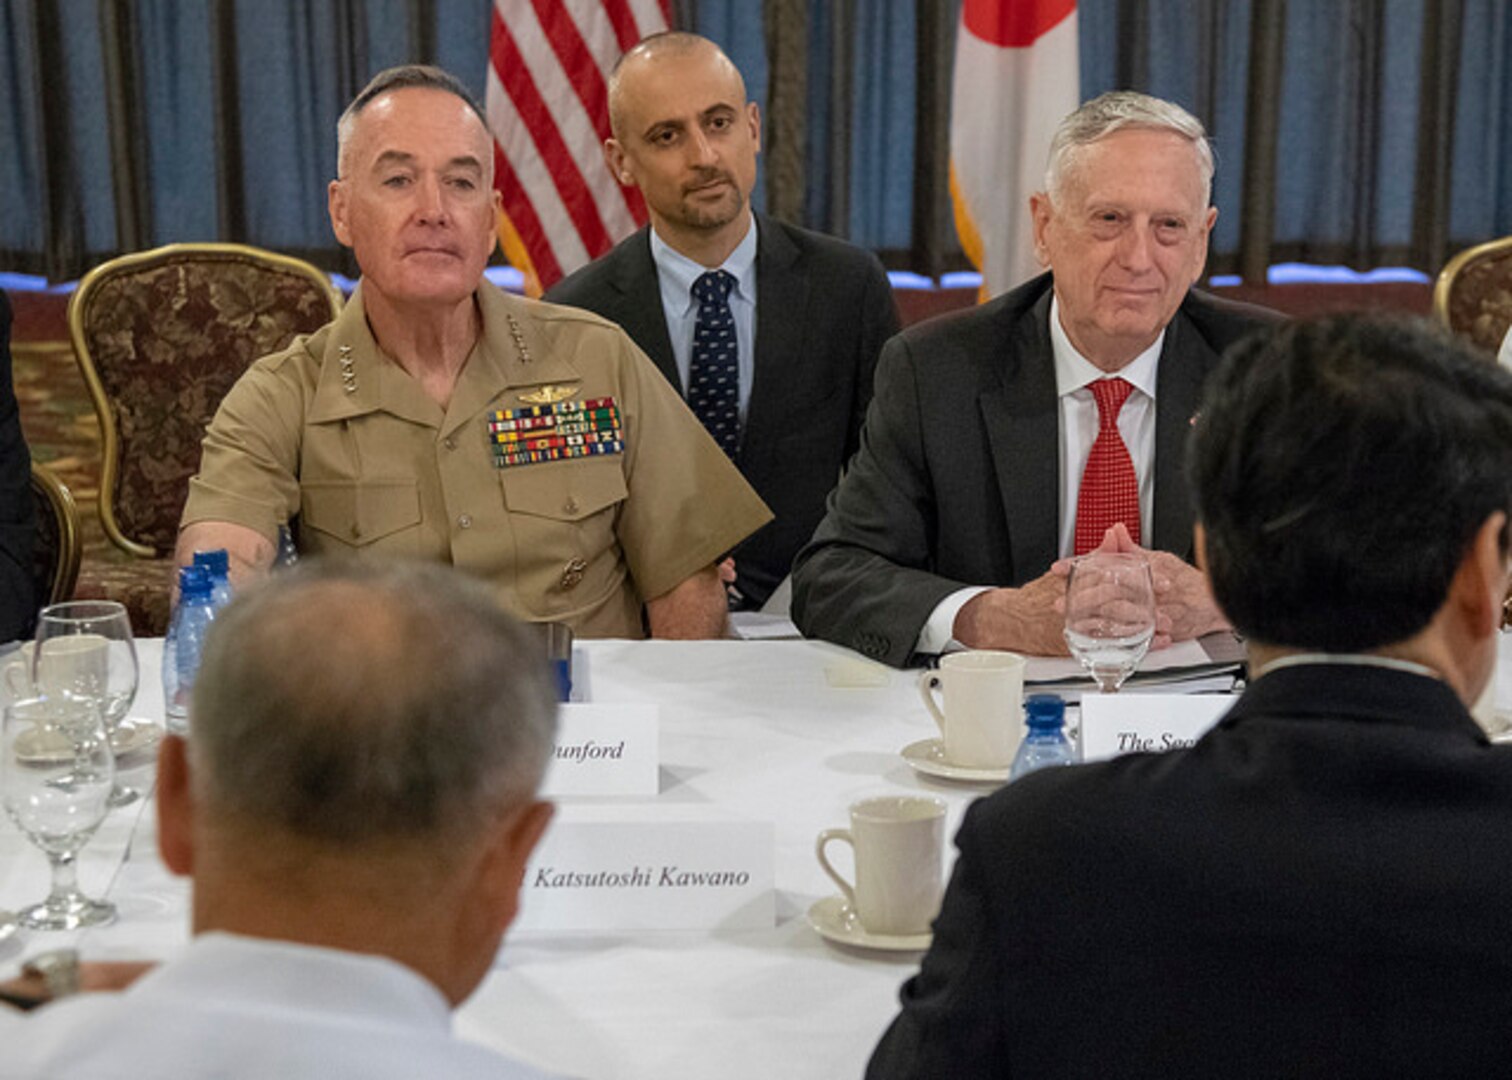 The Office of the Secretary of Defense and the Joint Chiefs: An Unequal  Dialogue in Which Direction?